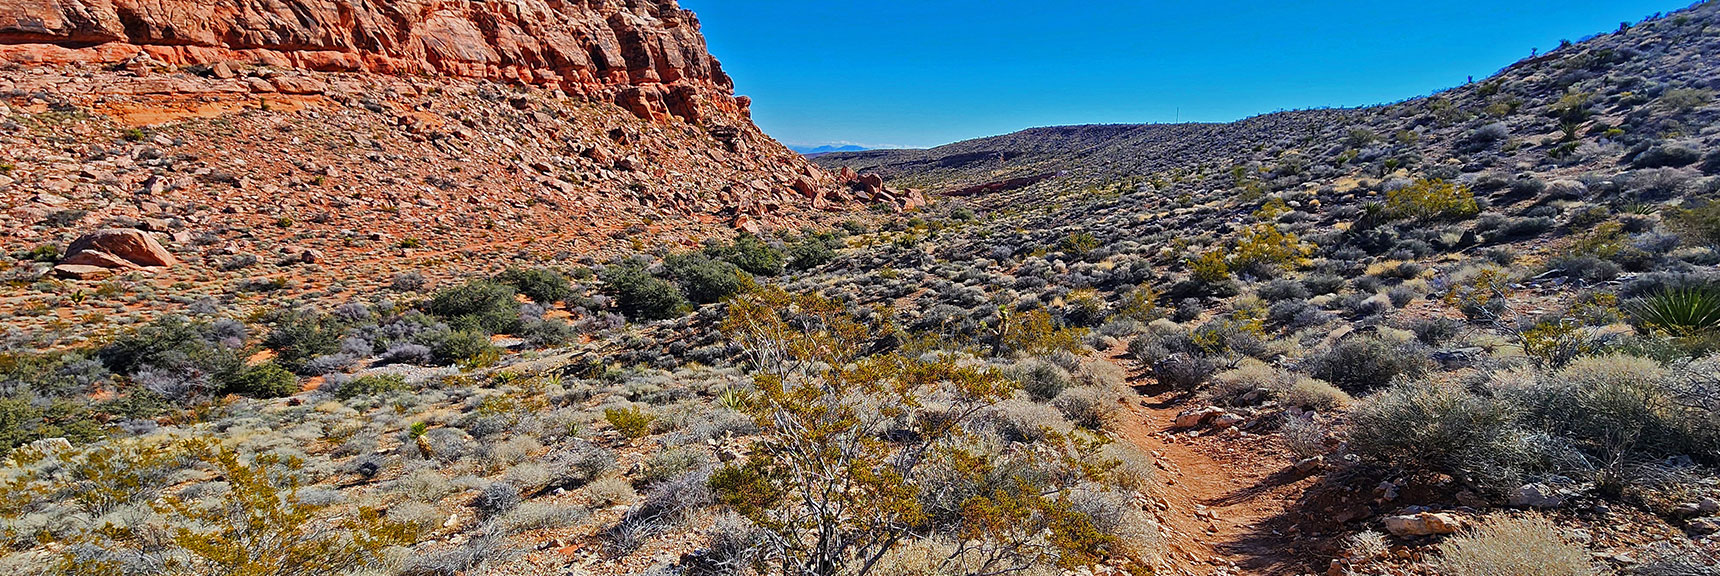 You'll Skirt the Beautiful Southern Base of the Calico Hills. Many Massive Sand Stone Formations | Calico Basin Daily Workout Trails | Calico Basin, Nevada